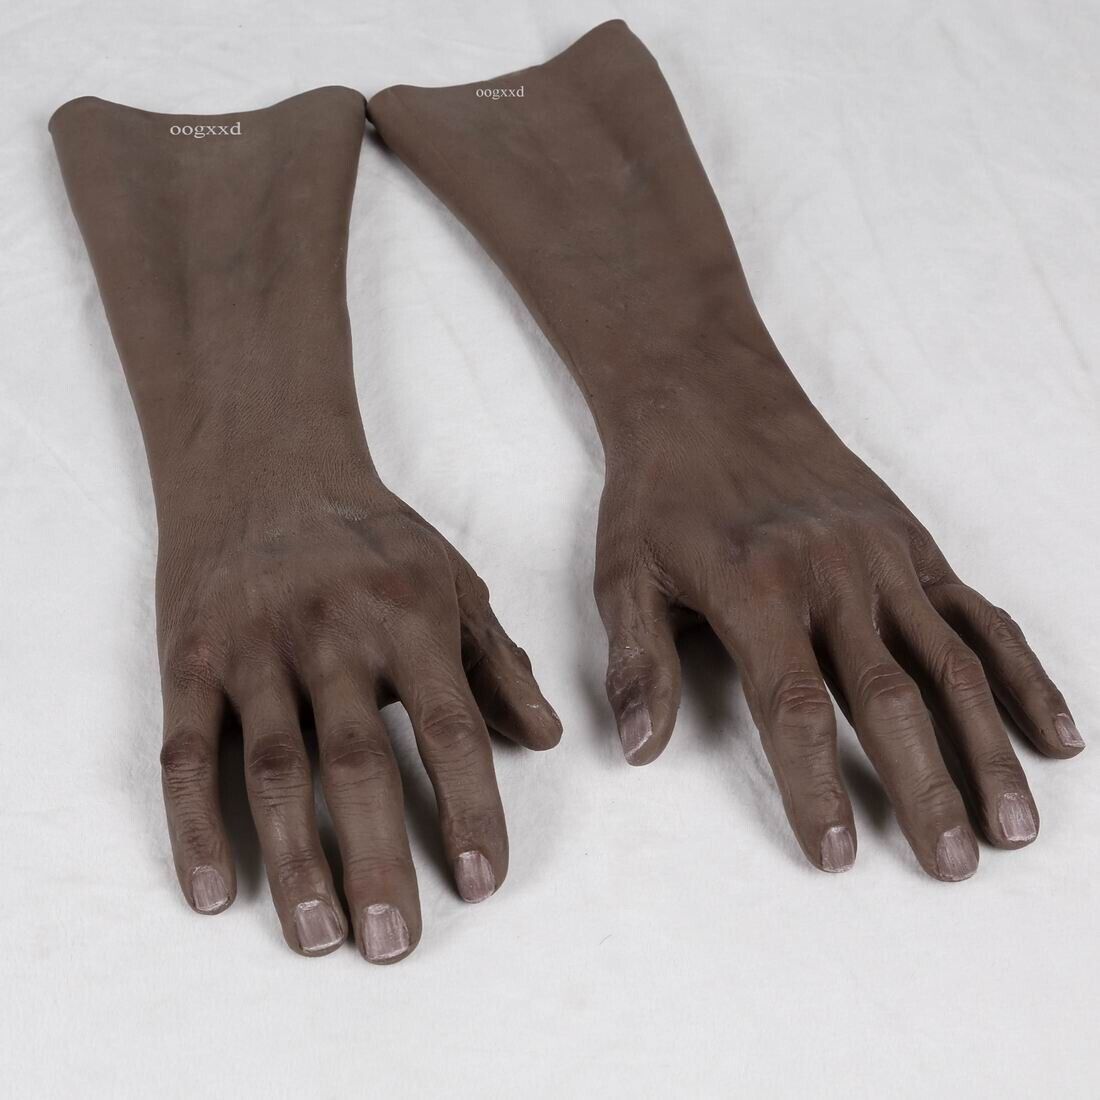 Silicone gloves with realistic black skin / Black artificial limb gloves/ gloves